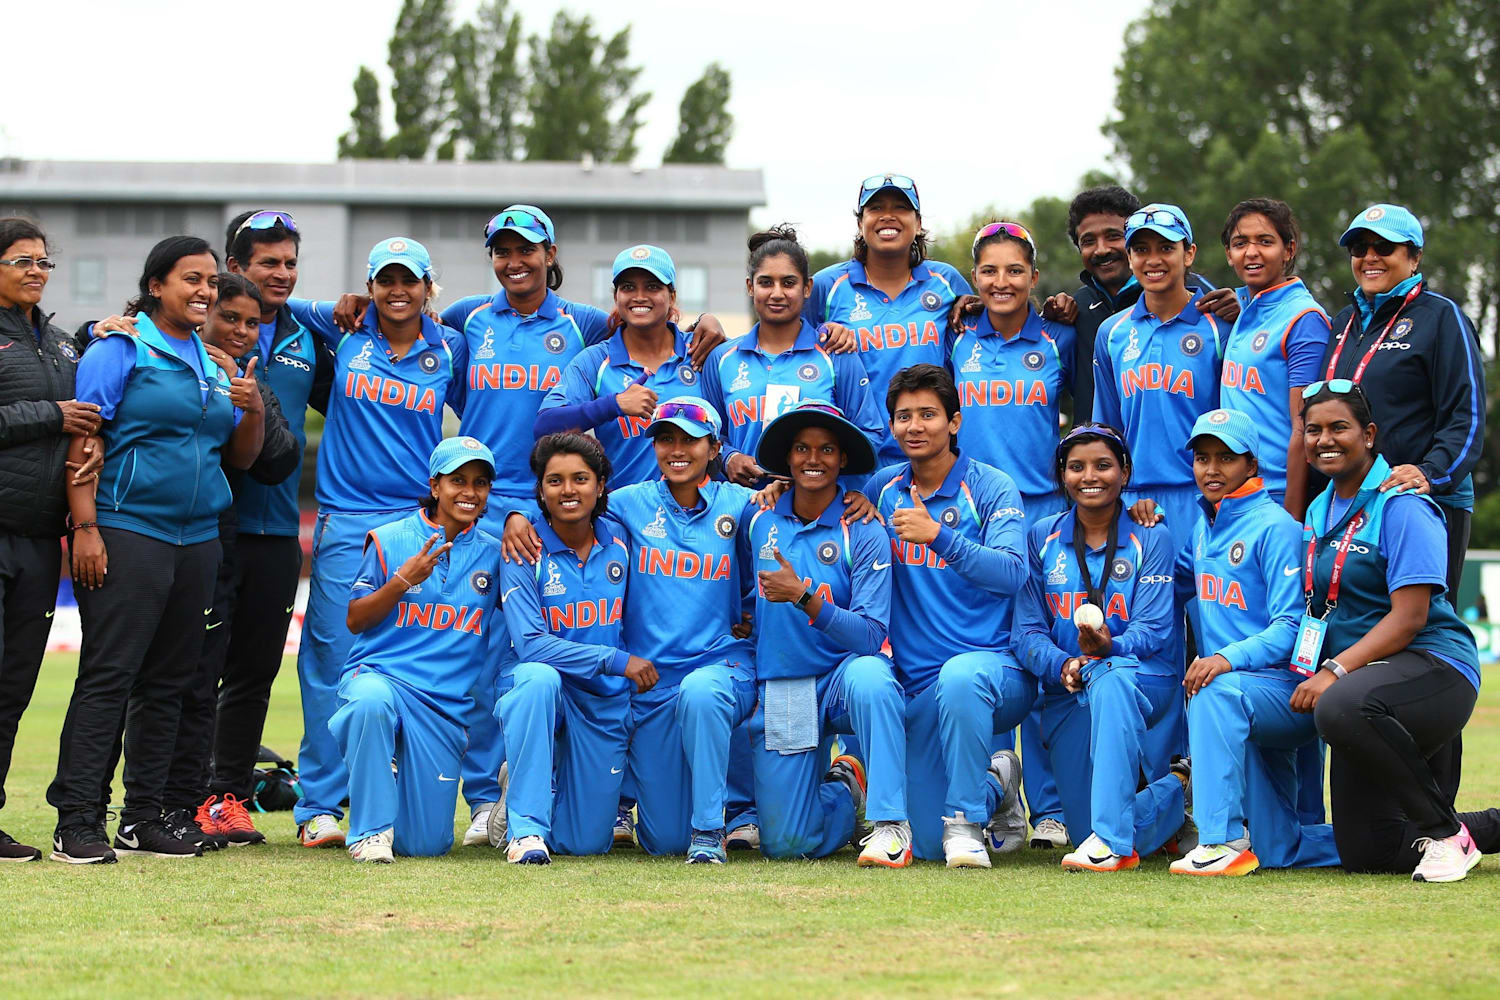 How Indian S Women Cricket Team Reached The Finals 2017